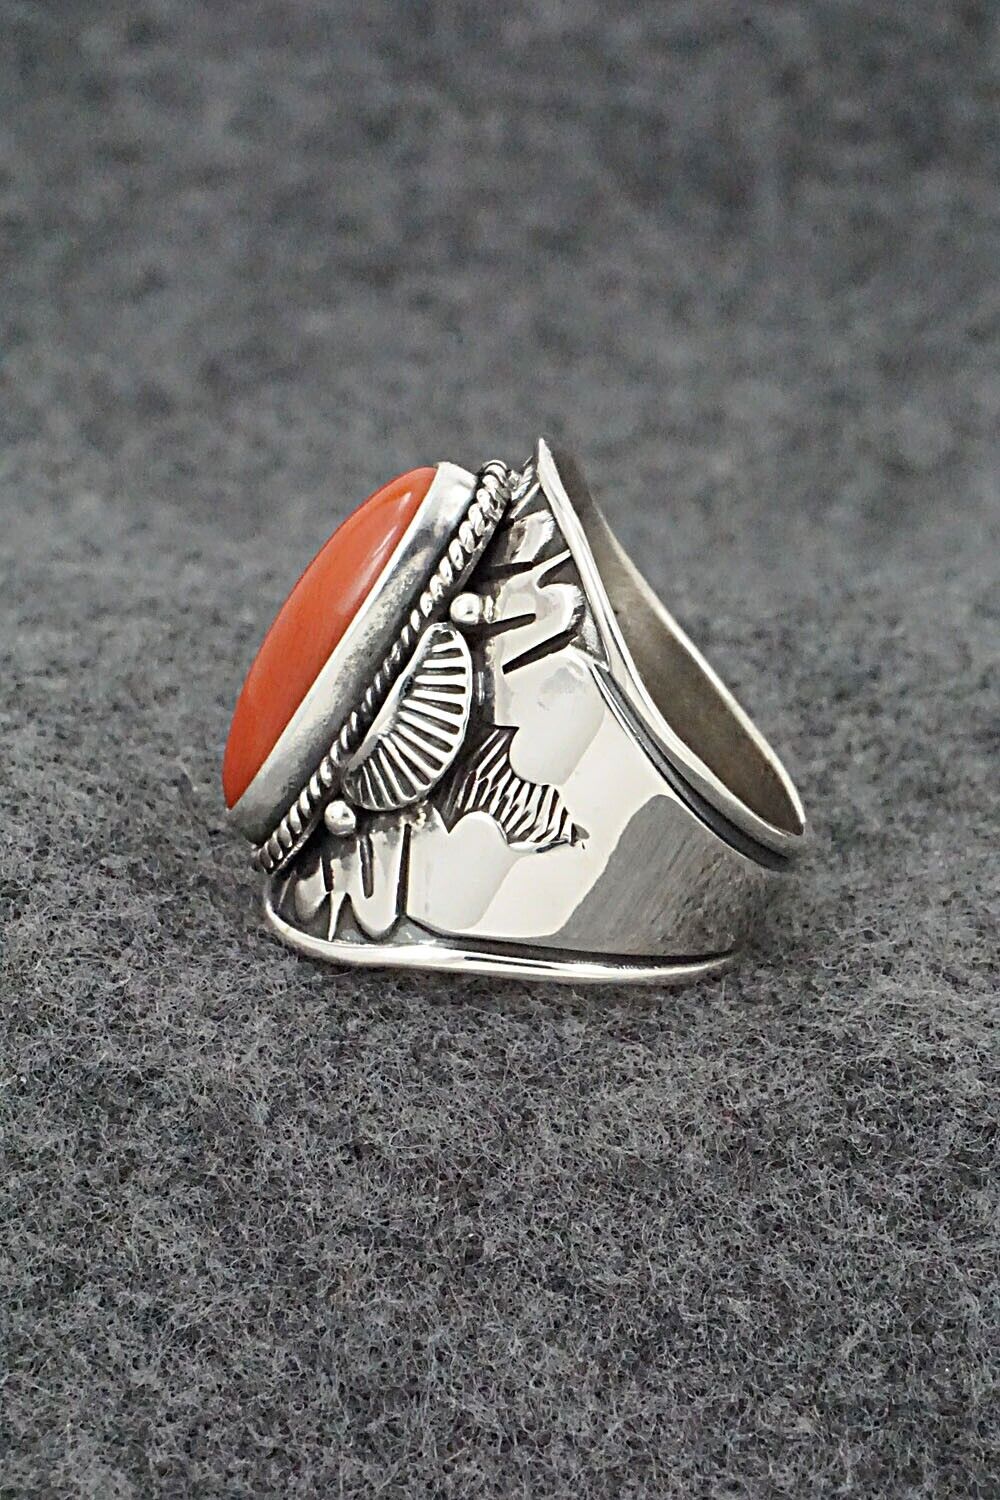 Coral & Sterling Silver Ring - Derrick Gordon - Size 9